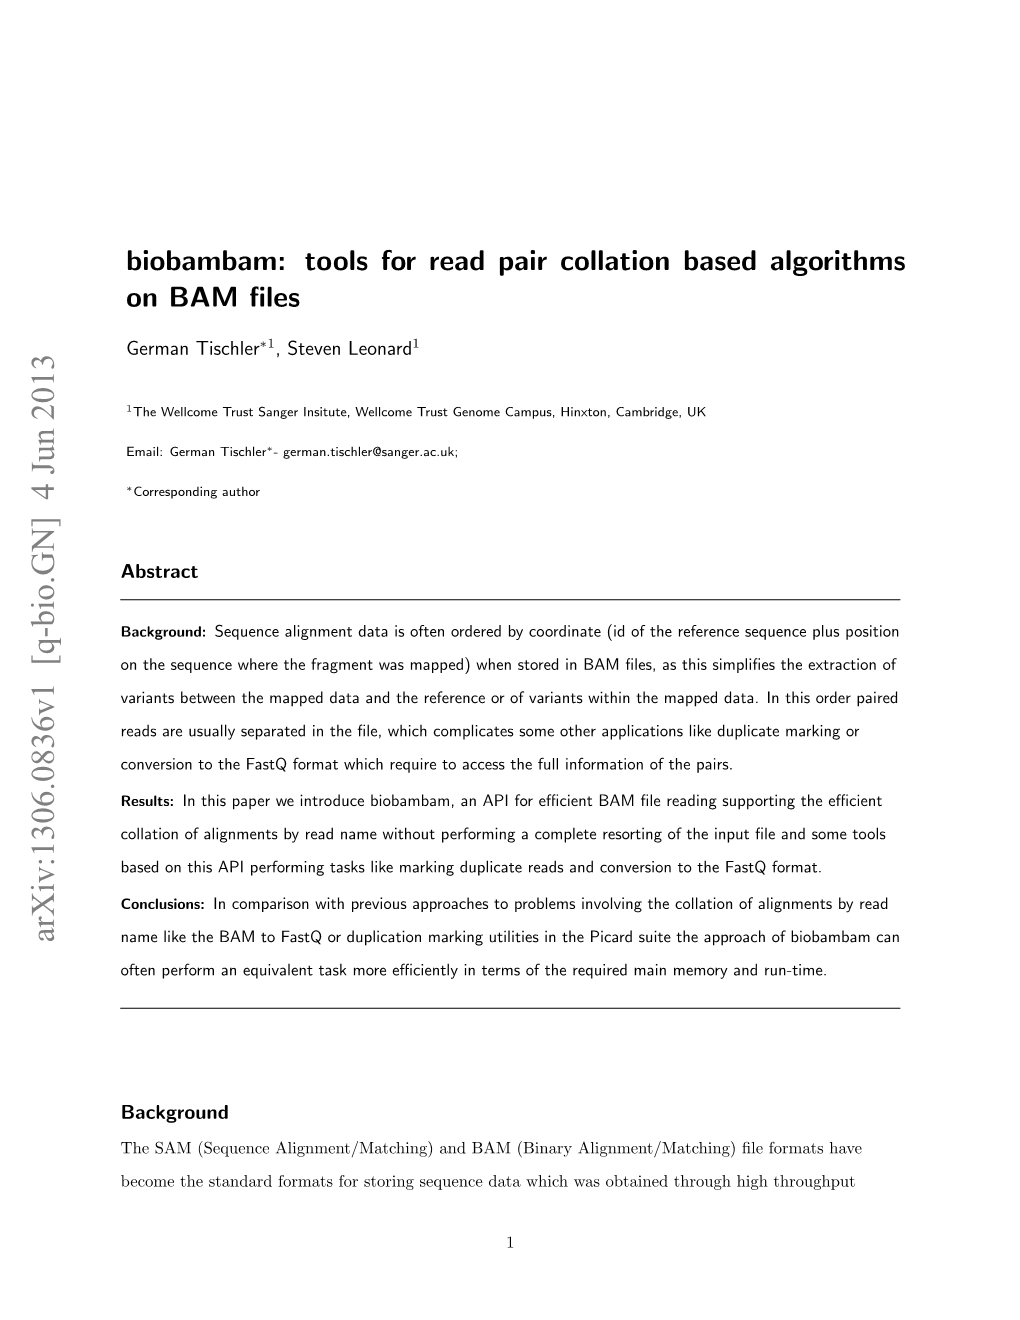 Biobambam: Tools for Read Pair Collation Based Algorithms on BAM ﬁles